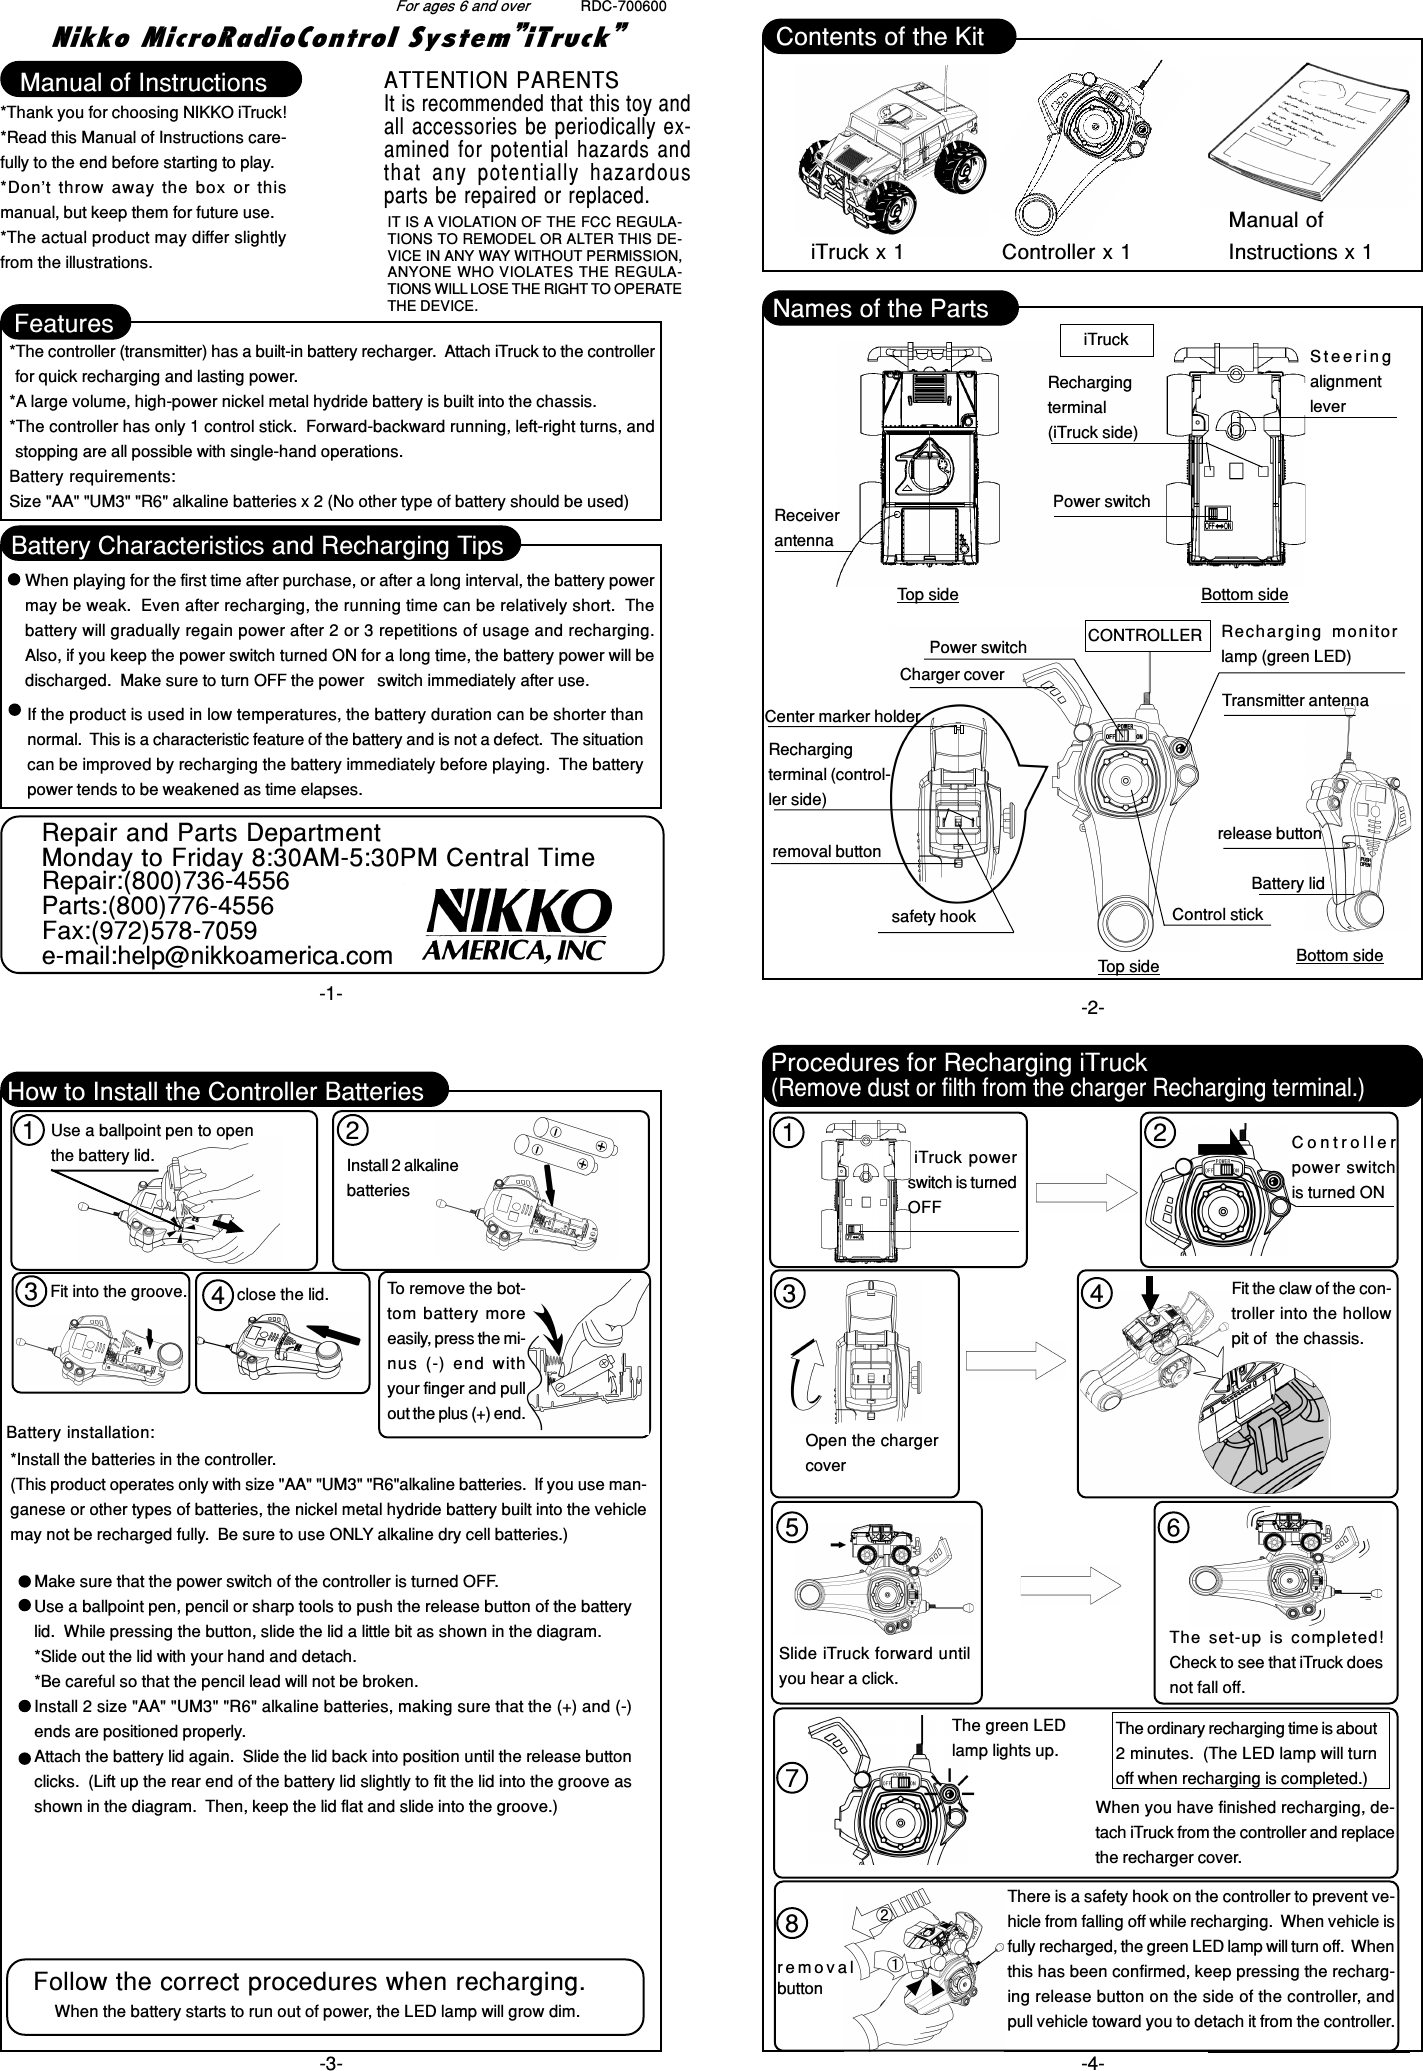 Nikko MicroRadioControl System”iTruck”RDC-700600-2--3- -4--1-For ages 6 and overManual of Instructions*Thank you for choosing NIKKO iTruck!*Read this Manual of Instructions care-fully to the end before starting to play.*Don’t throw away the box or thismanual, but keep them for future use.*The actual product may differ slightlyfrom the illustrations.Features*The controller (transmitter) has a built-in battery recharger.  Attach iTruck to the controllerfor quick recharging and lasting power.*A large volume, high-power nickel metal hydride battery is built into the chassis.*The controller has only 1 control stick.  Forward-backward running, left-right turns, andstopping are all possible with single-hand operations.Battery requirements:Size &quot;AA&quot; &quot;UM3&quot; &quot;R6&quot; alkaline batteries x 2 (No other type of battery should be used)Battery Characteristics and Recharging TipsWhen playing for the first time after purchase, or after a long interval, the battery powermay be weak.  Even after recharging, the running time can be relatively short.  Thebattery will gradually regain power after 2 or 3 repetitions of usage and recharging.Also, if you keep the power switch turned ON for a long time, the battery power will bedischarged.  Make sure to turn OFF the power   switch immediately after use.Names of the PartsiTruckReceiverantennaTop sideSteeringalignmentleverPower switchBottom sideRechargingterminal(iTruck side)Charger coverCONTROLLERCenter marker holderRechargingterminal (control-ler side)release buttonPower switch Recharging  monitorlamp (green LED)Control stickTop sideTransmitter antennaBattery lidBottom sidesafety hookremoval buttonHow to Install the Controller BatteriesUse a ballpoint pen to openthe battery lid. Install 2 alkalinebatteriesBattery installation:*Install the batteries in the controller.(This product operates only with size &quot;AA&quot; &quot;UM3&quot; &quot;R6&quot;alkaline batteries.  If you use man-ganese or other types of batteries, the nickel metal hydride battery built into the vehiclemay not be recharged fully.  Be sure to use ONLY alkaline dry cell batteries.)Make sure that the power switch of the controller is turned OFF.Use a ballpoint pen, pencil or sharp tools to push the release button of the batterylid.  While pressing the button, slide the lid a little bit as shown in the diagram.*Slide out the lid with your hand and detach.*Be careful so that the pencil lead will not be broken.Install 2 size &quot;AA&quot; &quot;UM3&quot; &quot;R6&quot; alkaline batteries, making sure that the (+) and (-)ends are positioned properly.Attach the battery lid again.  Slide the lid back into position until the release buttonclicks.  (Lift up the rear end of the battery lid slightly to fit the lid into the groove asshown in the diagram.  Then, keep the lid flat and slide into the groove.)There is a safety hook on the controller to prevent ve-hicle from falling off while recharging.  When vehicle isfully recharged, the green LED lamp will turn off.  Whenthis has been confirmed, keep pressing the recharg-ing release button on the side of the controller, andpull vehicle toward you to detach it from the controller.removalbutton iTruck powerswitch is turnedOFFControllerpower switchis turned ONOpen the chargercoverFit the claw of the con-troller into the hollowpit of  the chassis.Slide iTruck forward untilyou hear a click.The set-up is completed!Check to see that iTruck doesnot fall off.The green LEDlamp lights up.The ordinary recharging time is about2 minutes.  (The LED lamp will turnoff when recharging is completed.)Contents of the KitiTruck x 1 Controller x 1Manual ofInstructions x 1close the lid.If the product is used in low temperatures, the battery duration can be shorter thannormal.  This is a characteristic feature of the battery and is not a defect.  The situationcan be improved by recharging the battery immediately before playing.  The batterypower tends to be weakened as time elapses.When you have finished recharging, de-tach iTruck from the controller and replacethe recharger cover.Fit into the groove. To remove the bot-tom battery moreeasily, press the mi-nus (-) end  withyour finger and pullout the plus (+) end.Procedures for Recharging iTruck(Remove dust or filth from the charger Recharging terminal.)Follow the correct procedures when recharging.When the battery starts to run out of power, the LED lamp will grow dim.1 2341 23 45 678ATTENTION PARENTSIt is recommended that this toy andall accessories be periodically ex-amined for potential  hazards andthat  any  potentially  hazardousparts be repaired or replaced.IT IS A VIOLATION OF THE FCC REGULA-TIONS TO REMODEL OR ALTER THIS DE-VICE IN ANY WAY WITHOUT PERMISSION,ANYONE WHO VIOLATES THE REGULA-TIONS WILL LOSE THE RIGHT TO OPERATETHE DEVICE.Repair and Parts DepartmentMonday to Friday 8:30AM-5:30PM Central TimeRepair:(800)736-4556Parts:(800)776-4556Fax:(972)578-7059e-mail:help@nikkoamerica.com